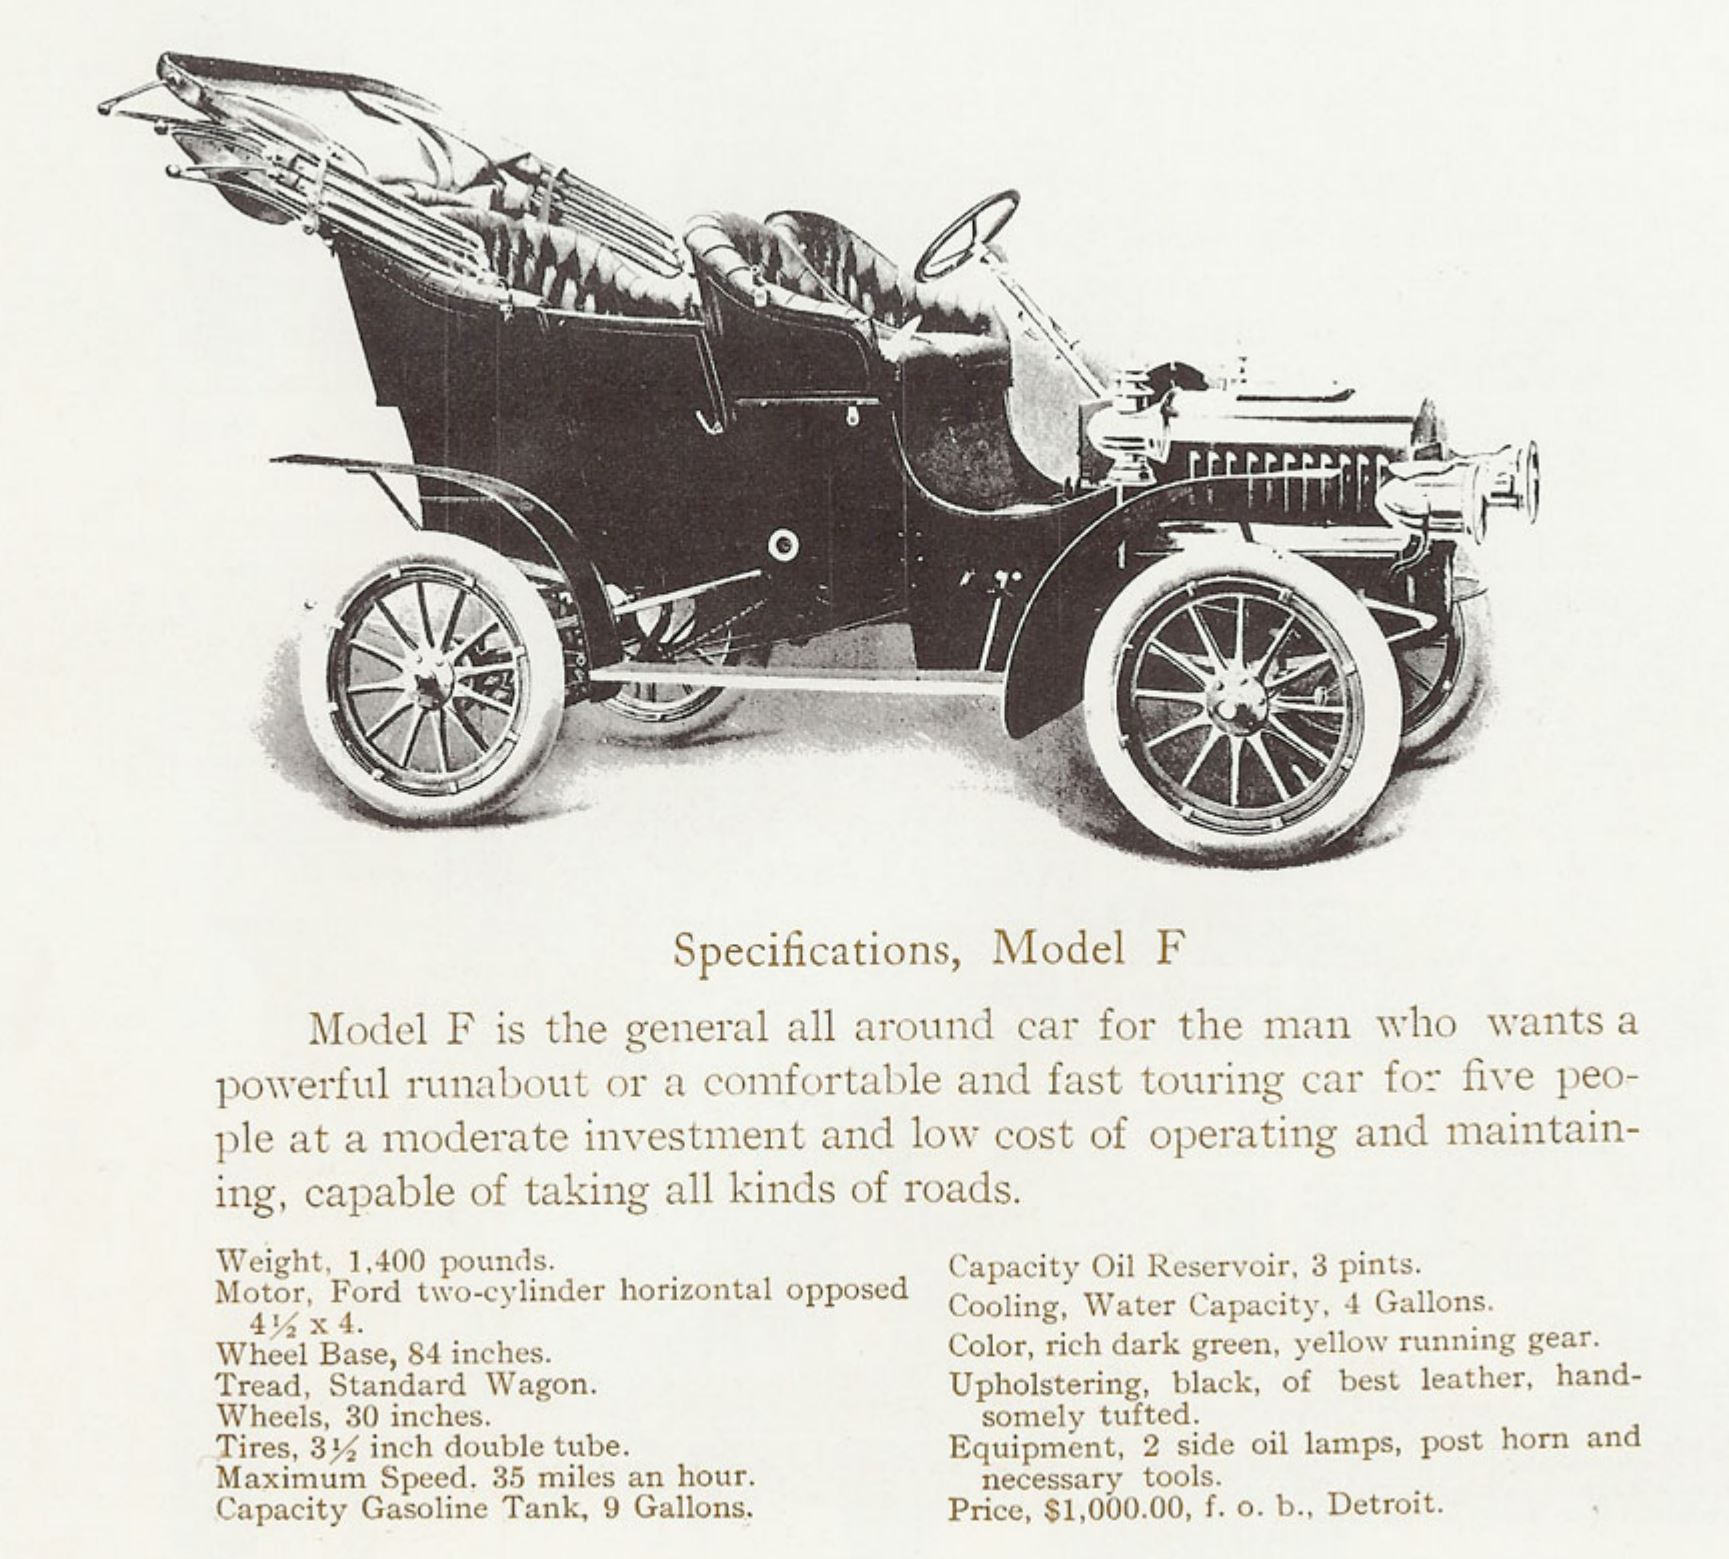 A page from the brochure of the 1906 Model f